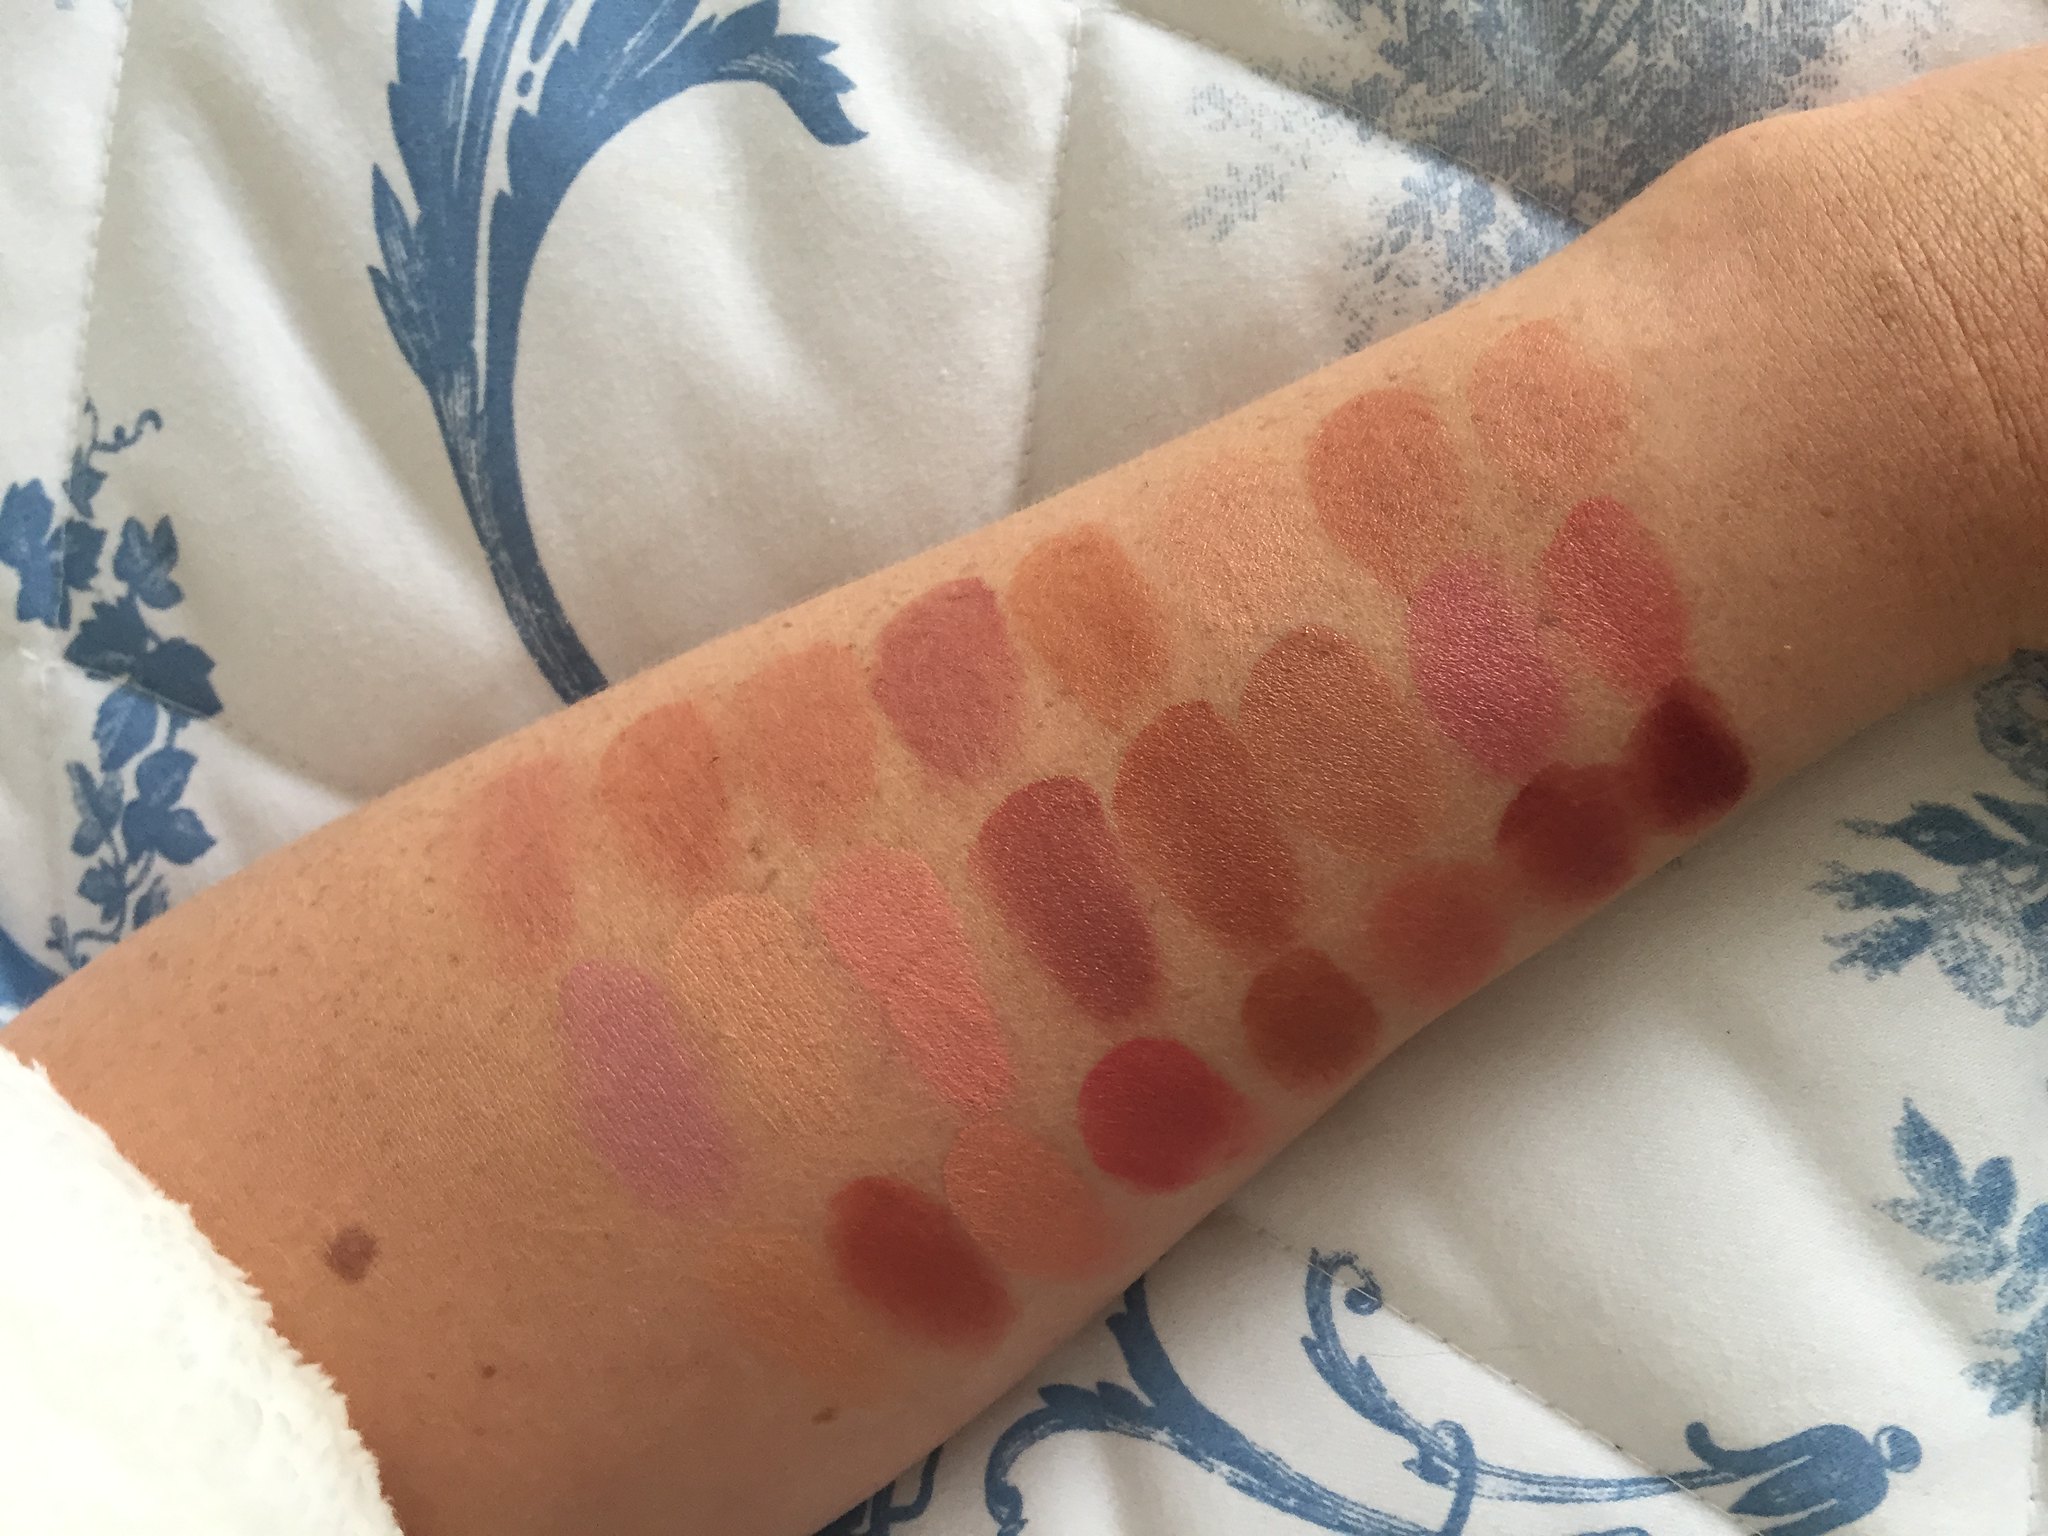 Freedom pro lipstick palette naked review and swatches